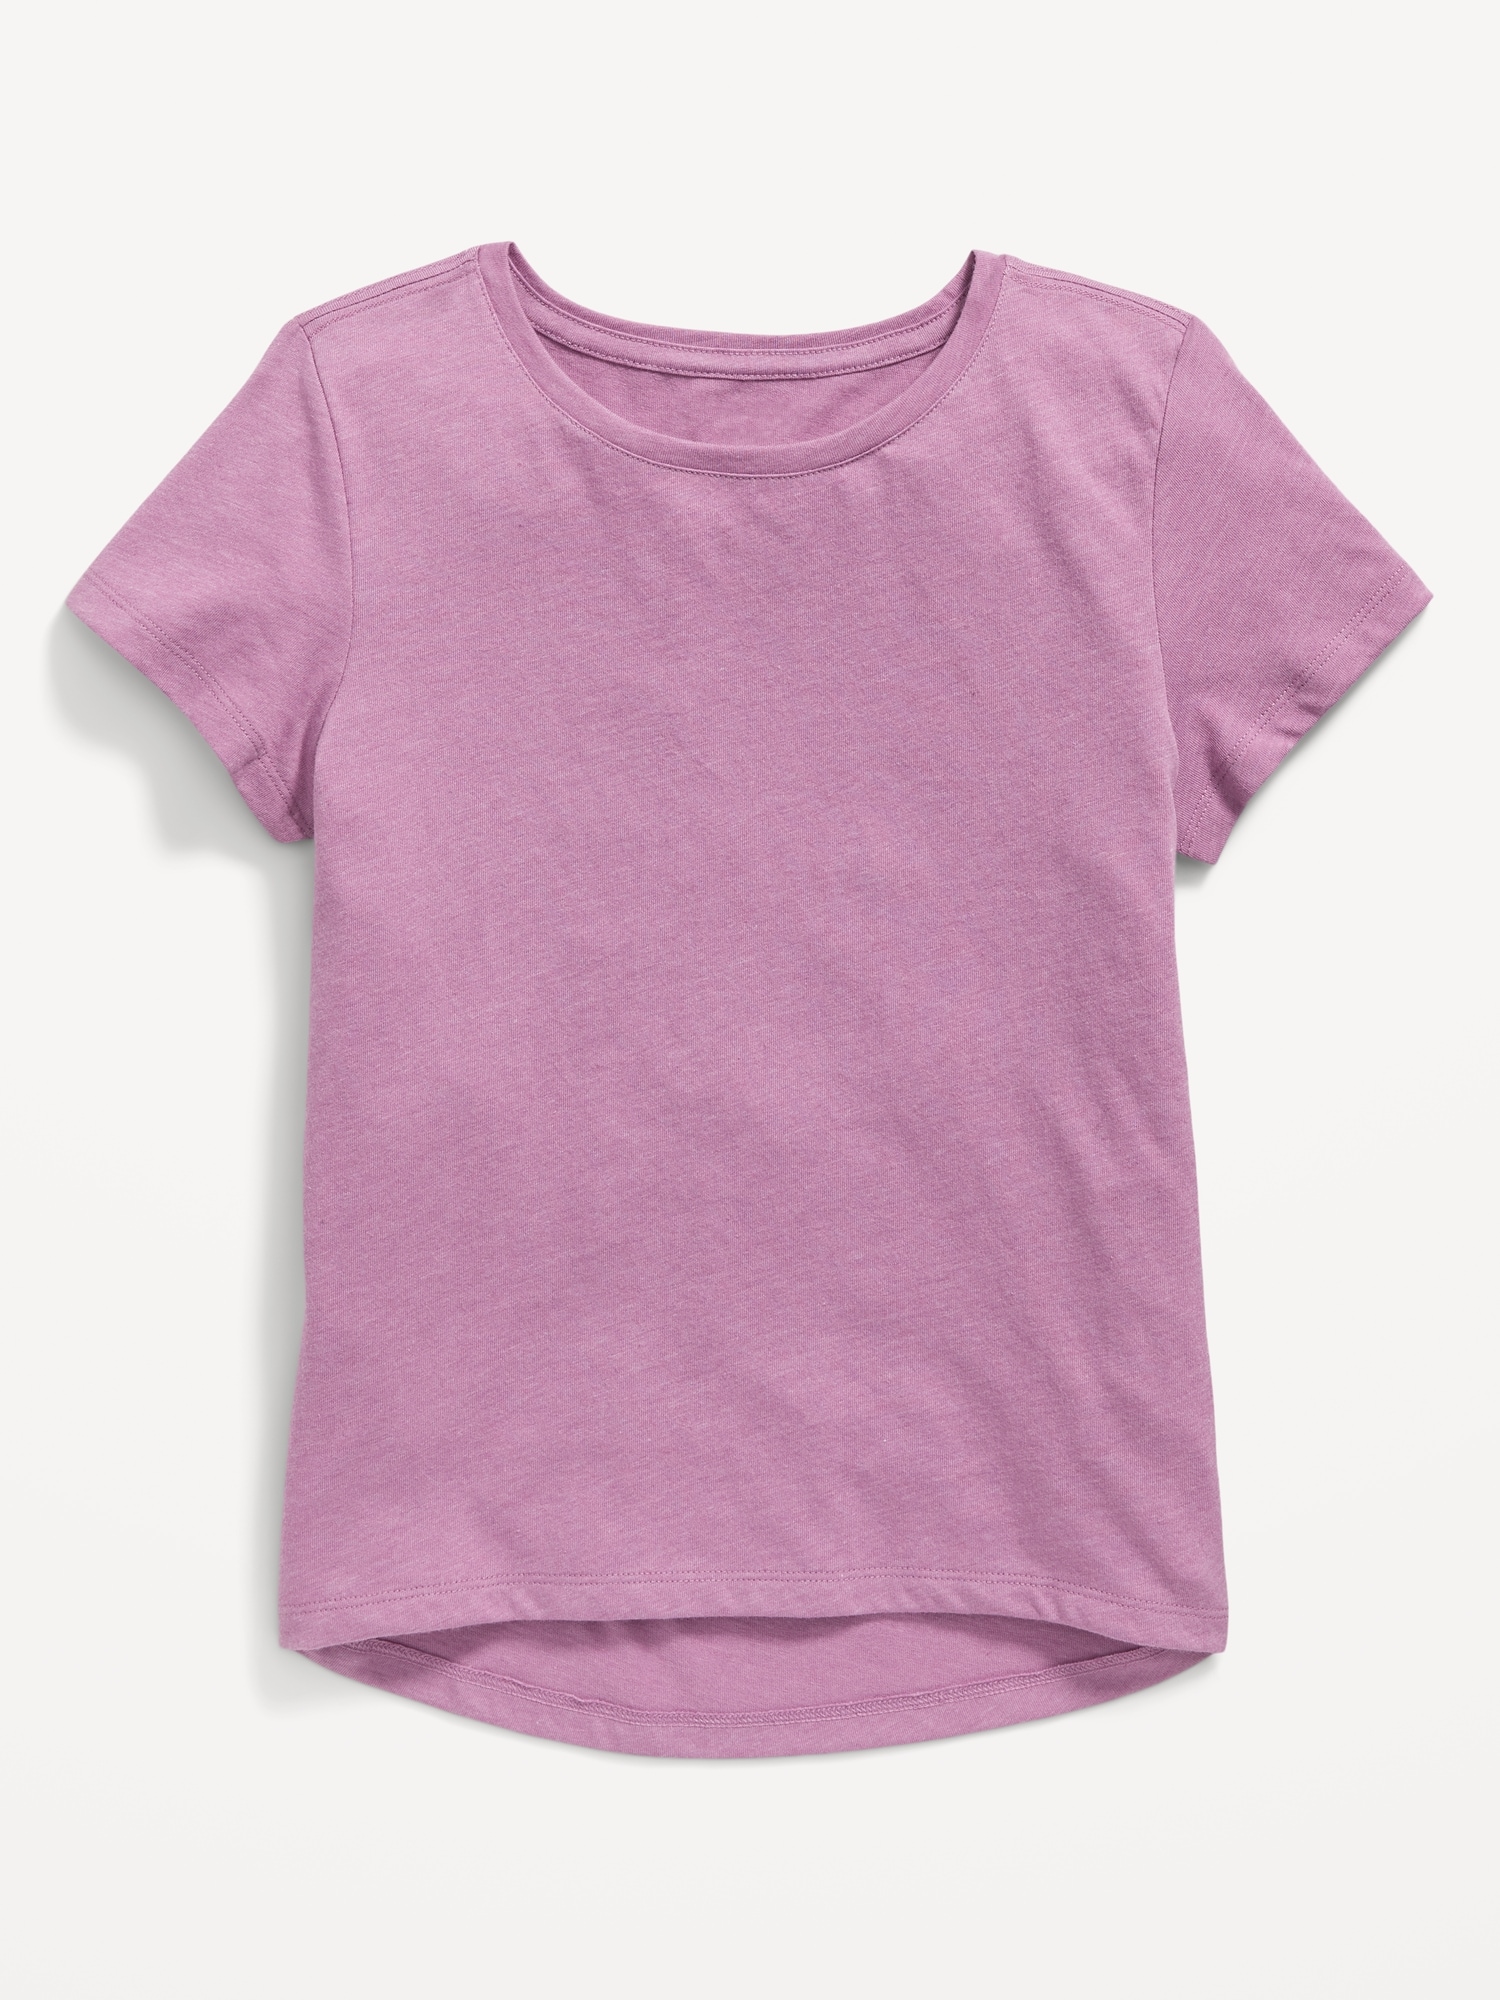 Old Navy Softest Solid T-Shirt for Girls purple. 1